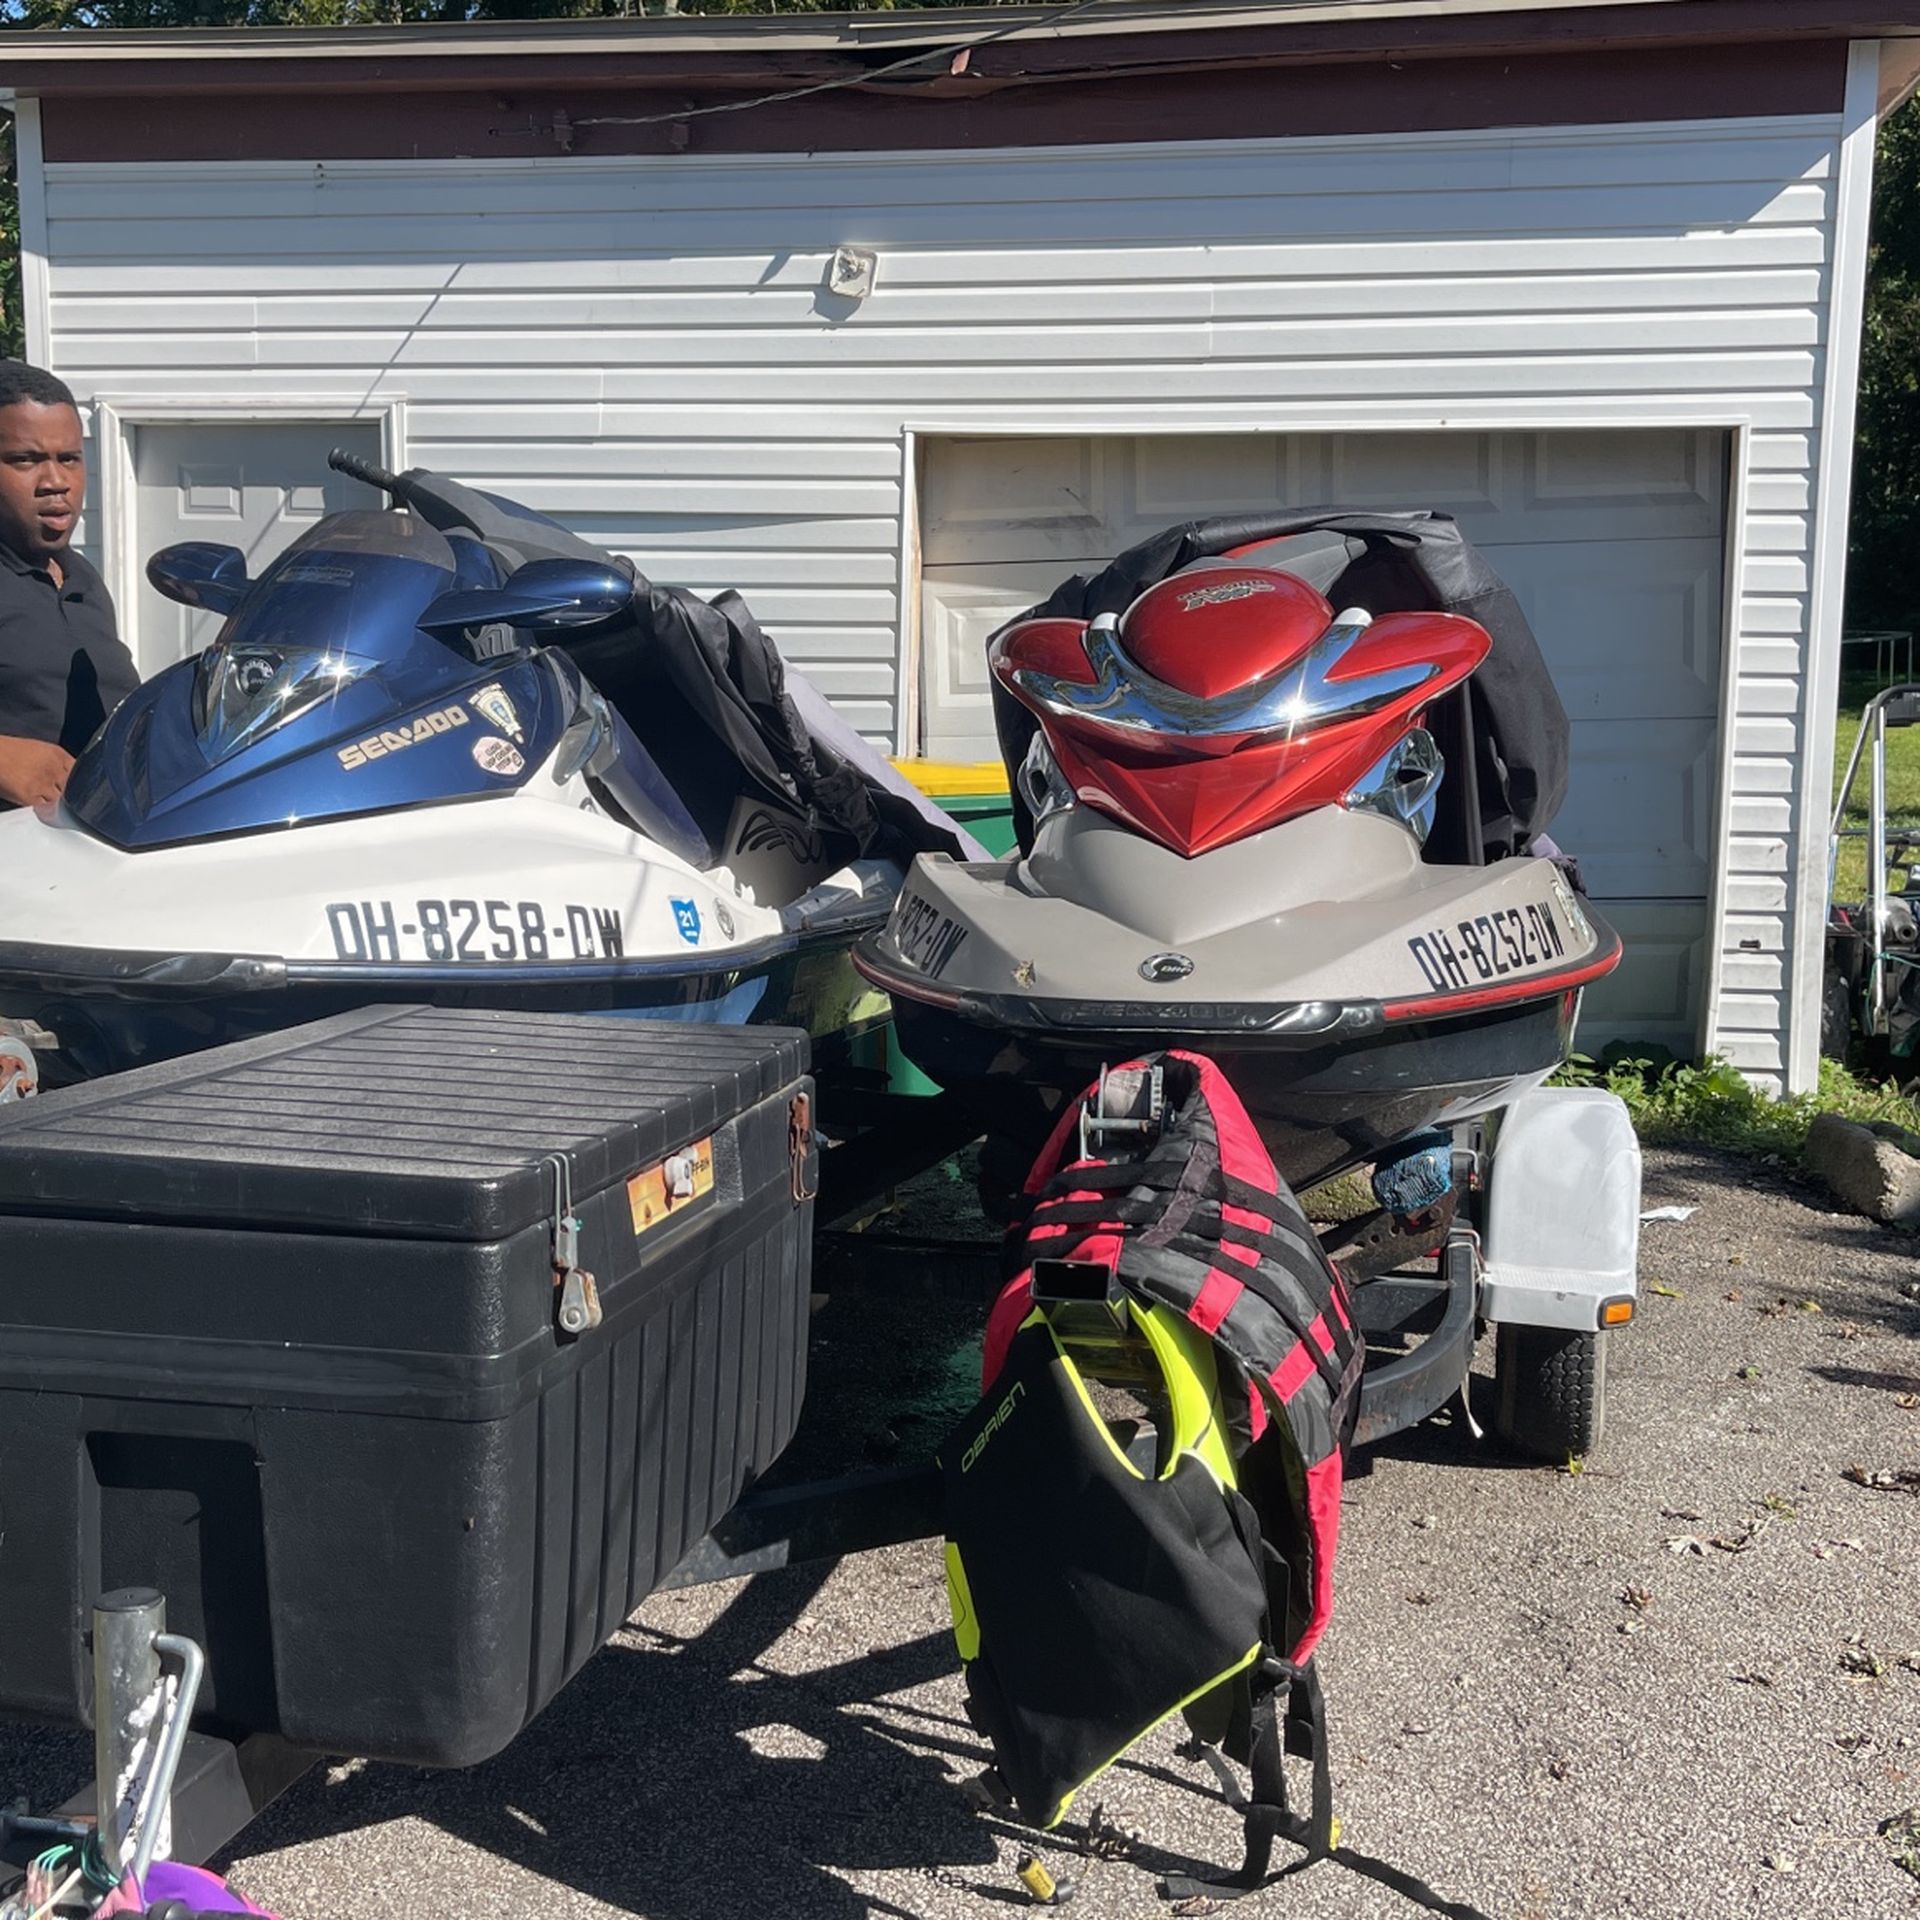 Jet Skis 2005 Super Charge Low Hours 